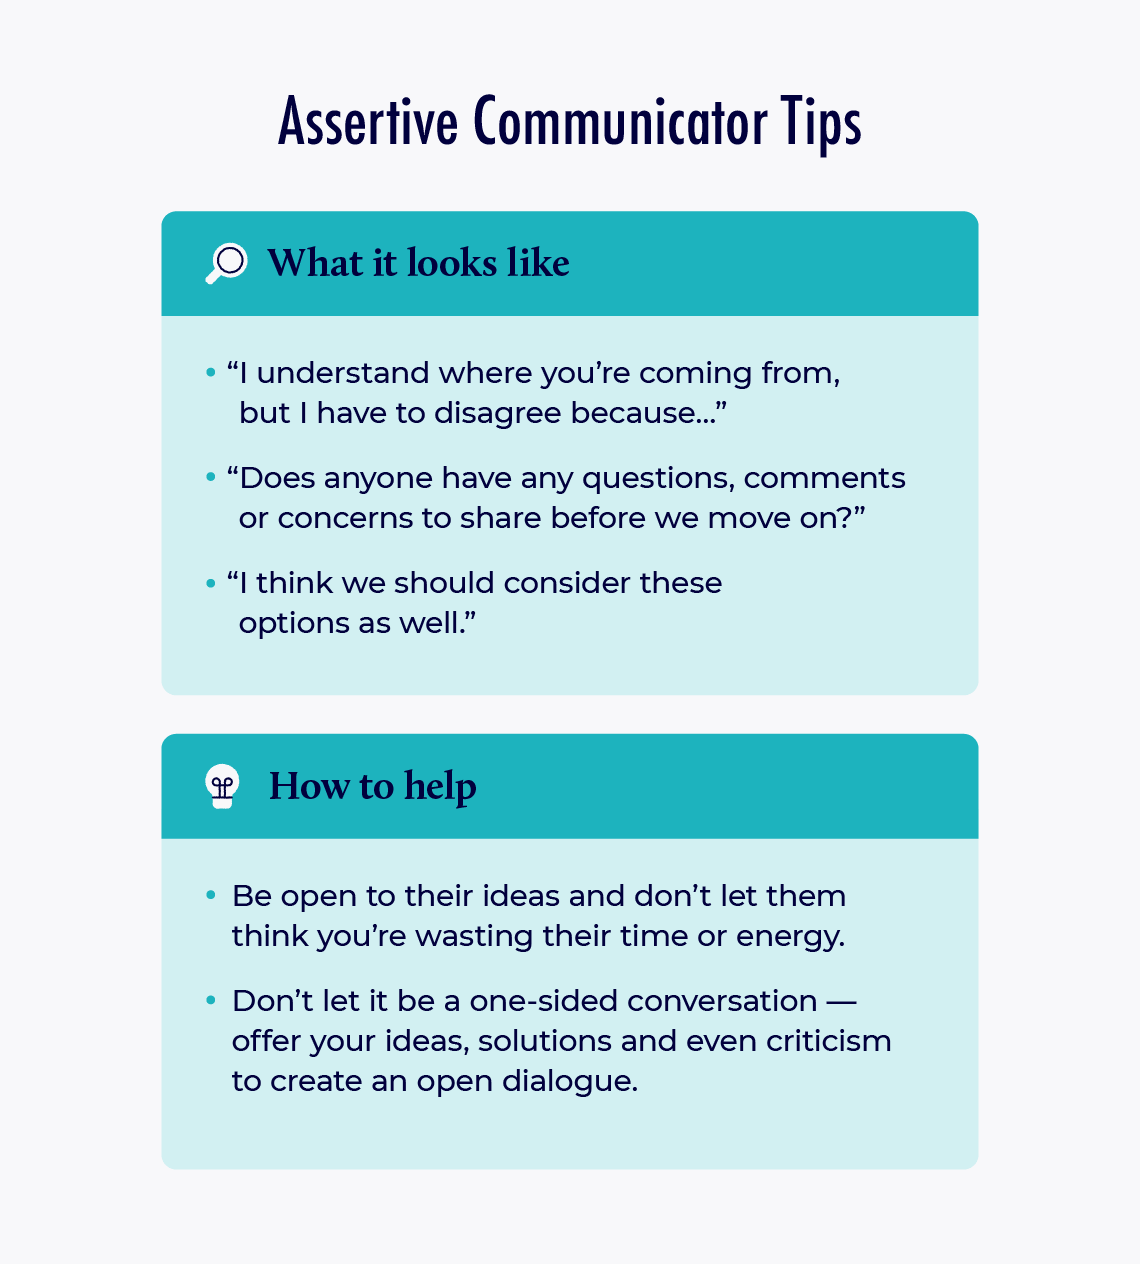 Communication styles in the workplace - assertive Communicator Tips